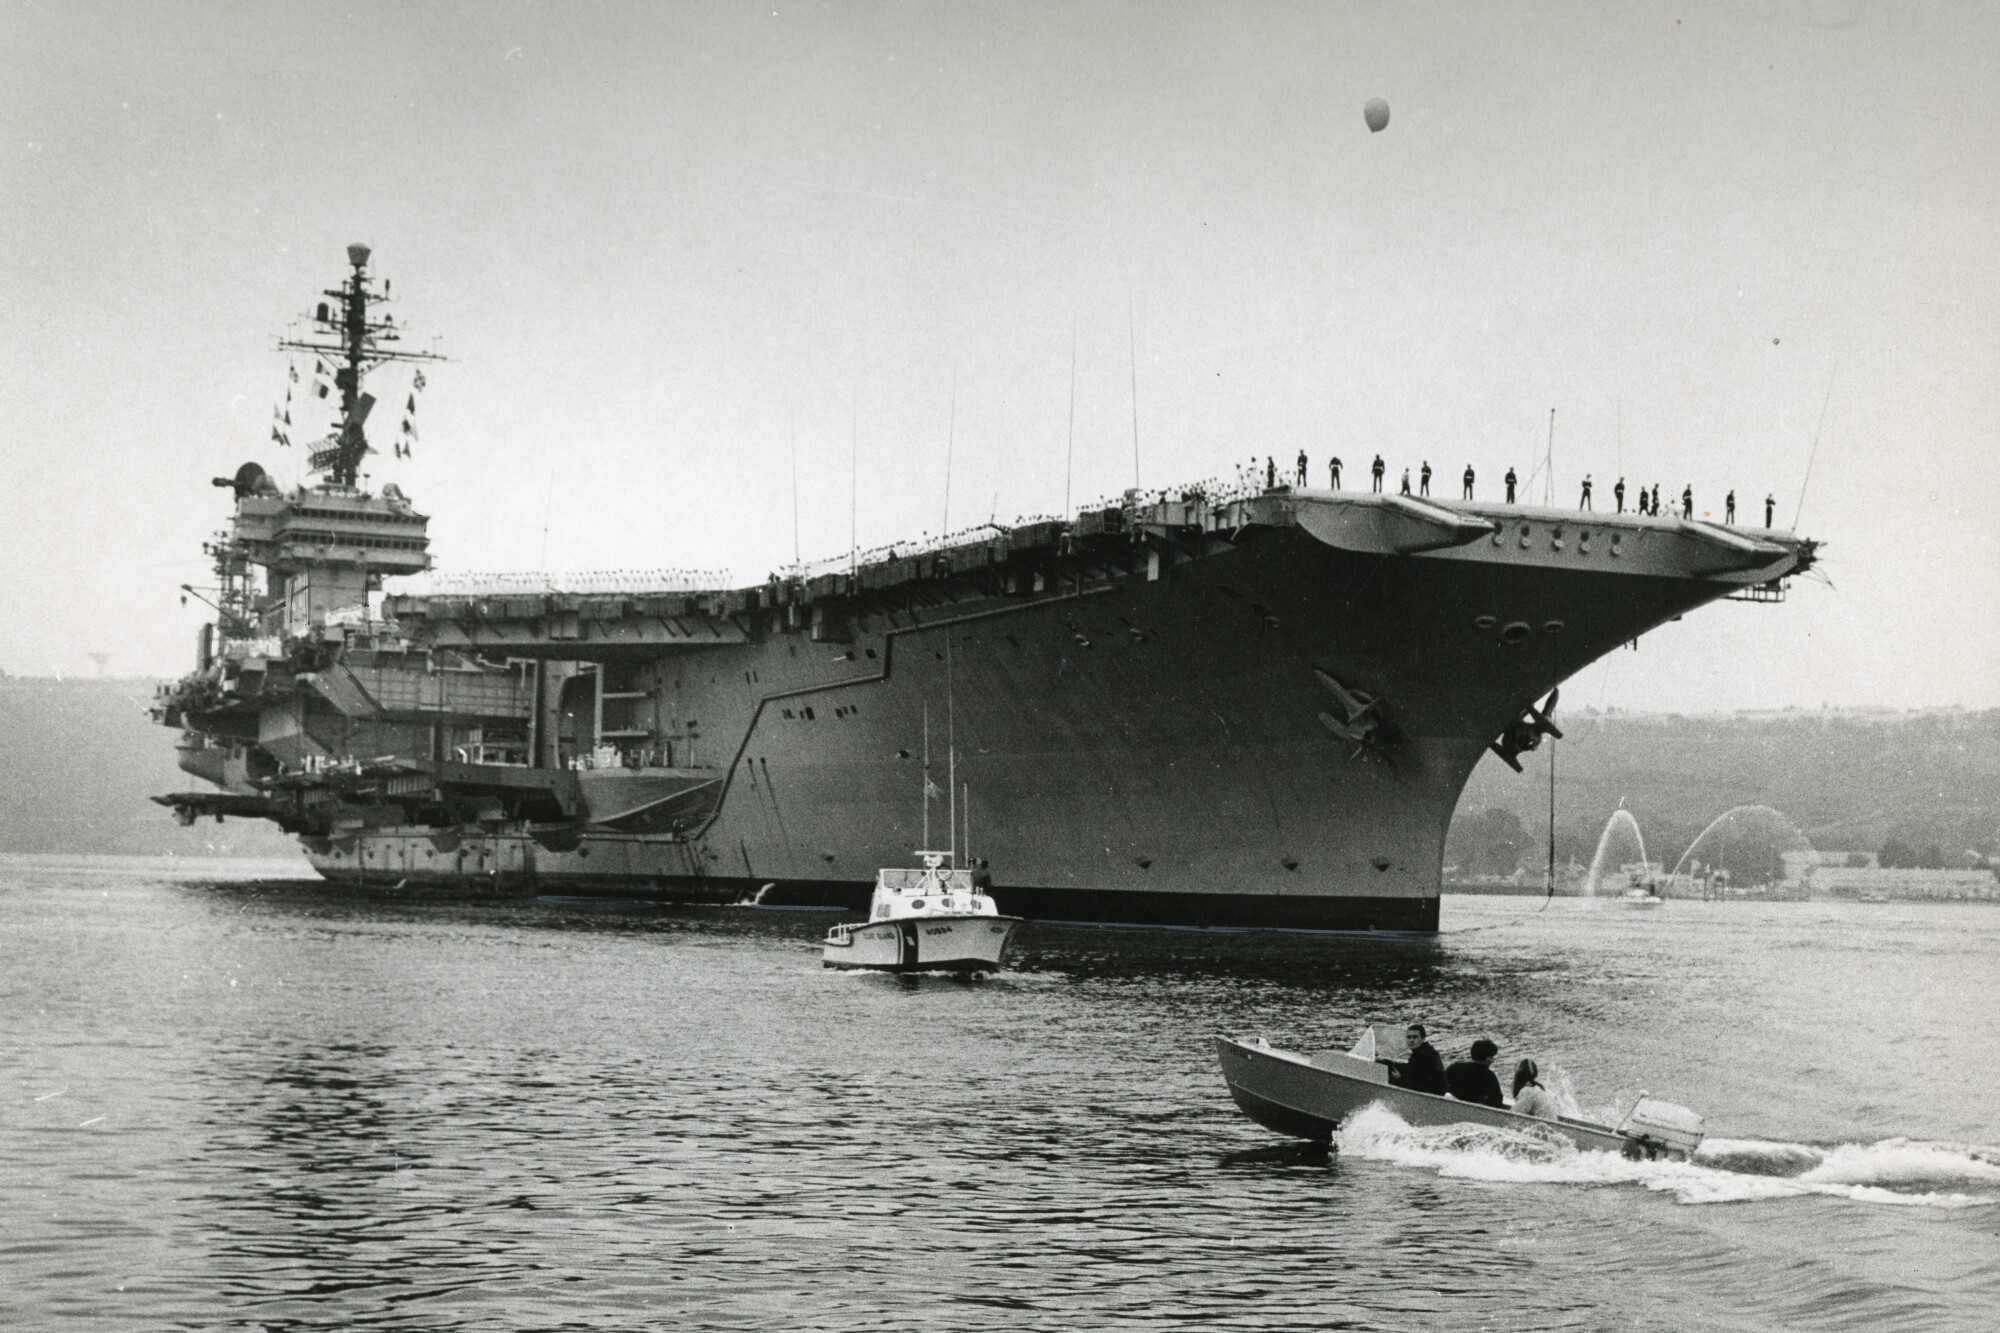 The aircraft carrier Kitty Hawk eases past Point Loma as an outboard motorboat roars beneath its bow in 1968.